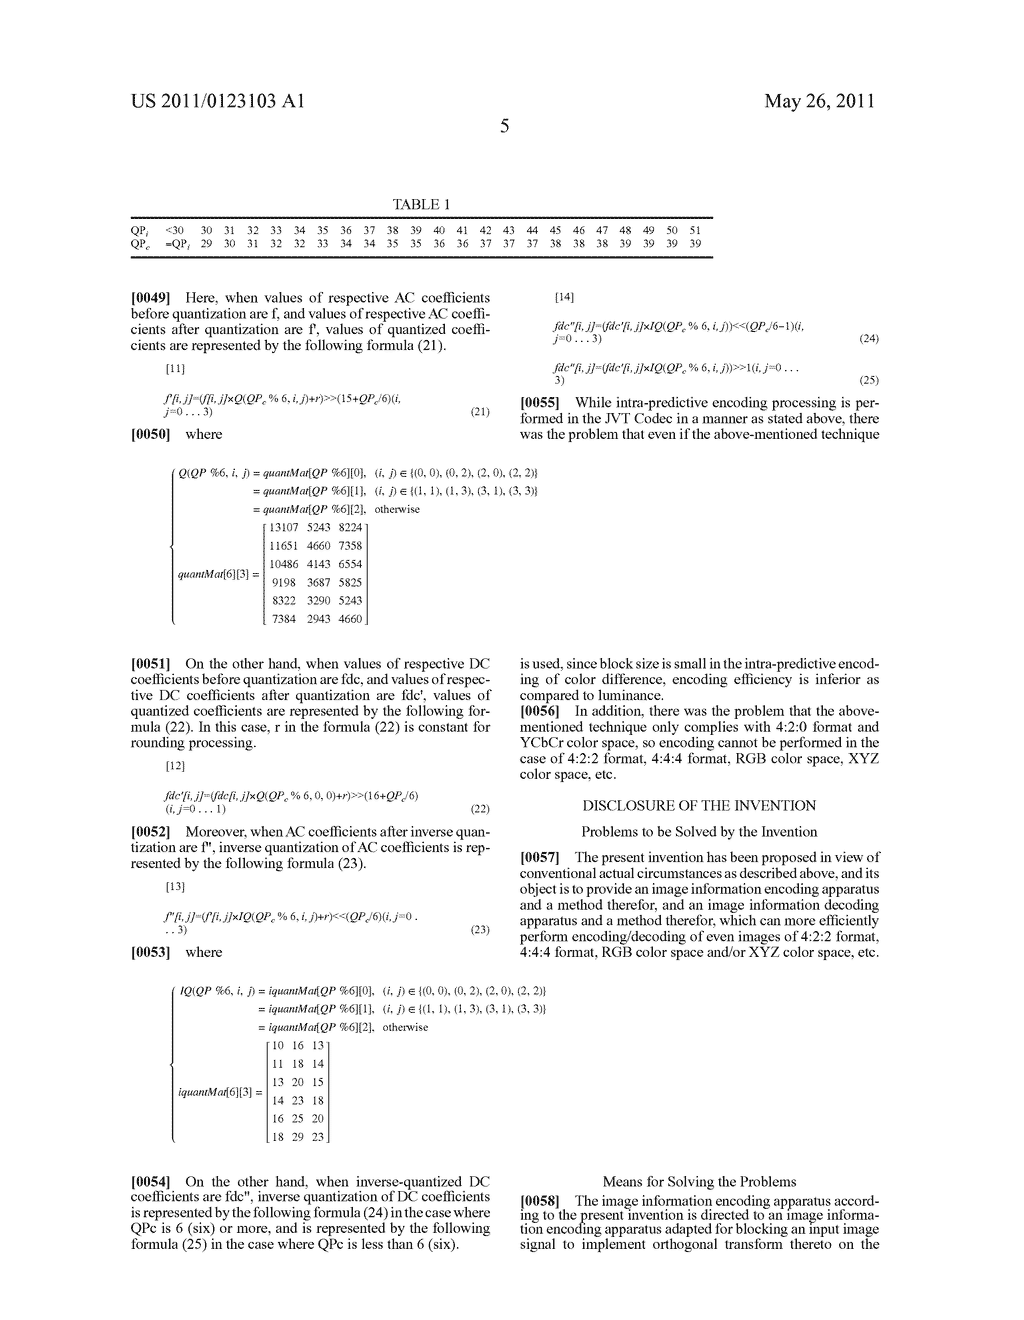 IMAGE DECODING APPARATUS AND METHOD FOR HANDLING INTRA-IMAGE PREDICTIVE DECODING WITH VARIOUS COLOR SPACES AND COLOR SIGNAL RESOLUTIONS - diagram, schematic, and image 18